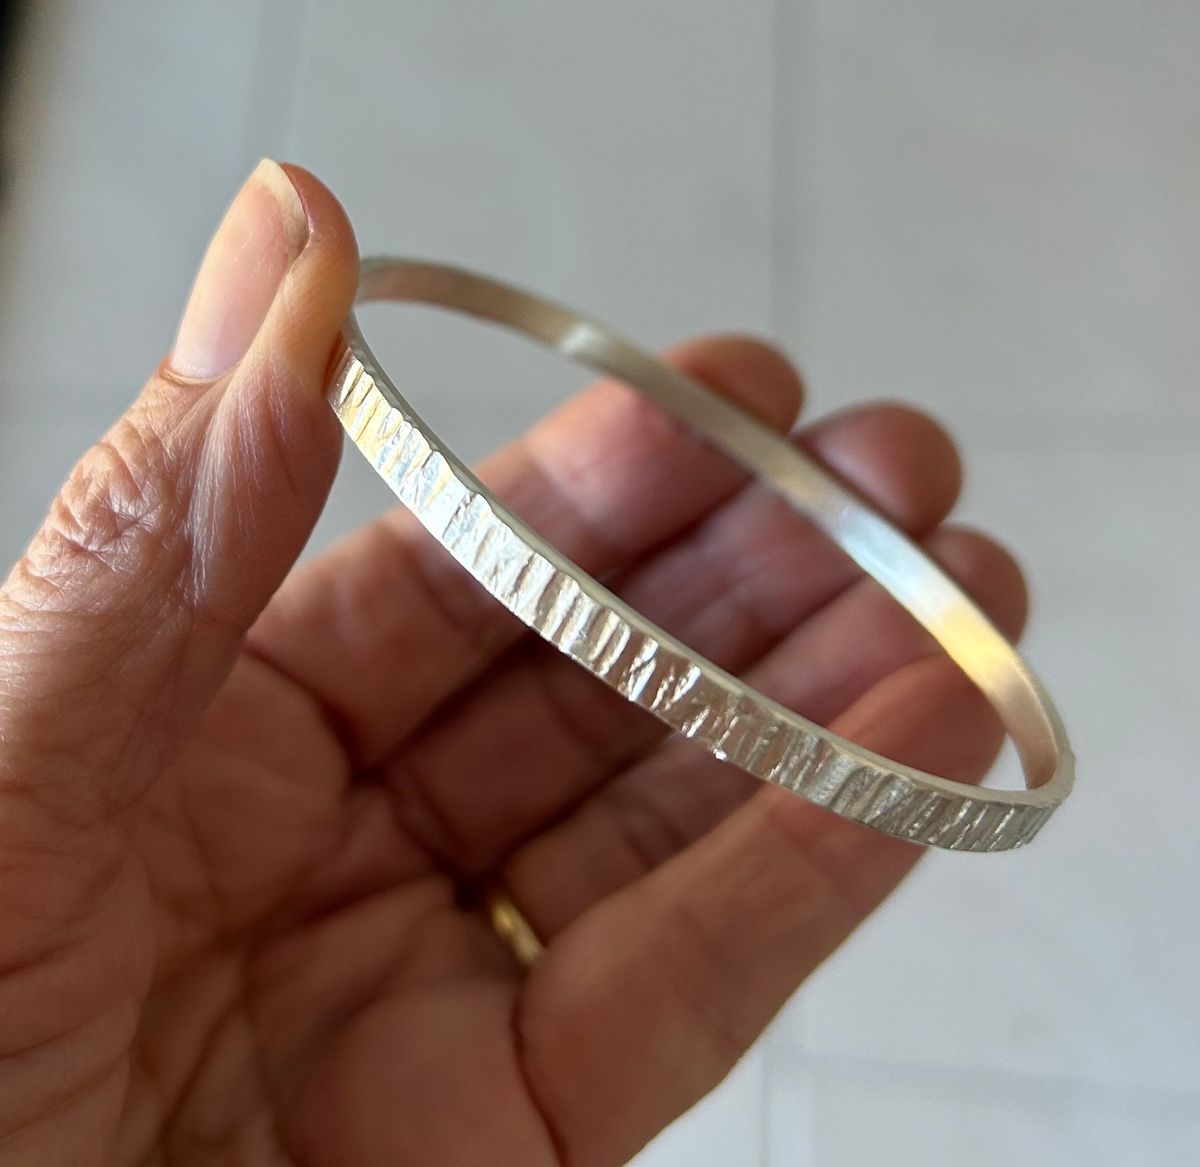 Textured Silver Bangle Workshop - 4 places available 